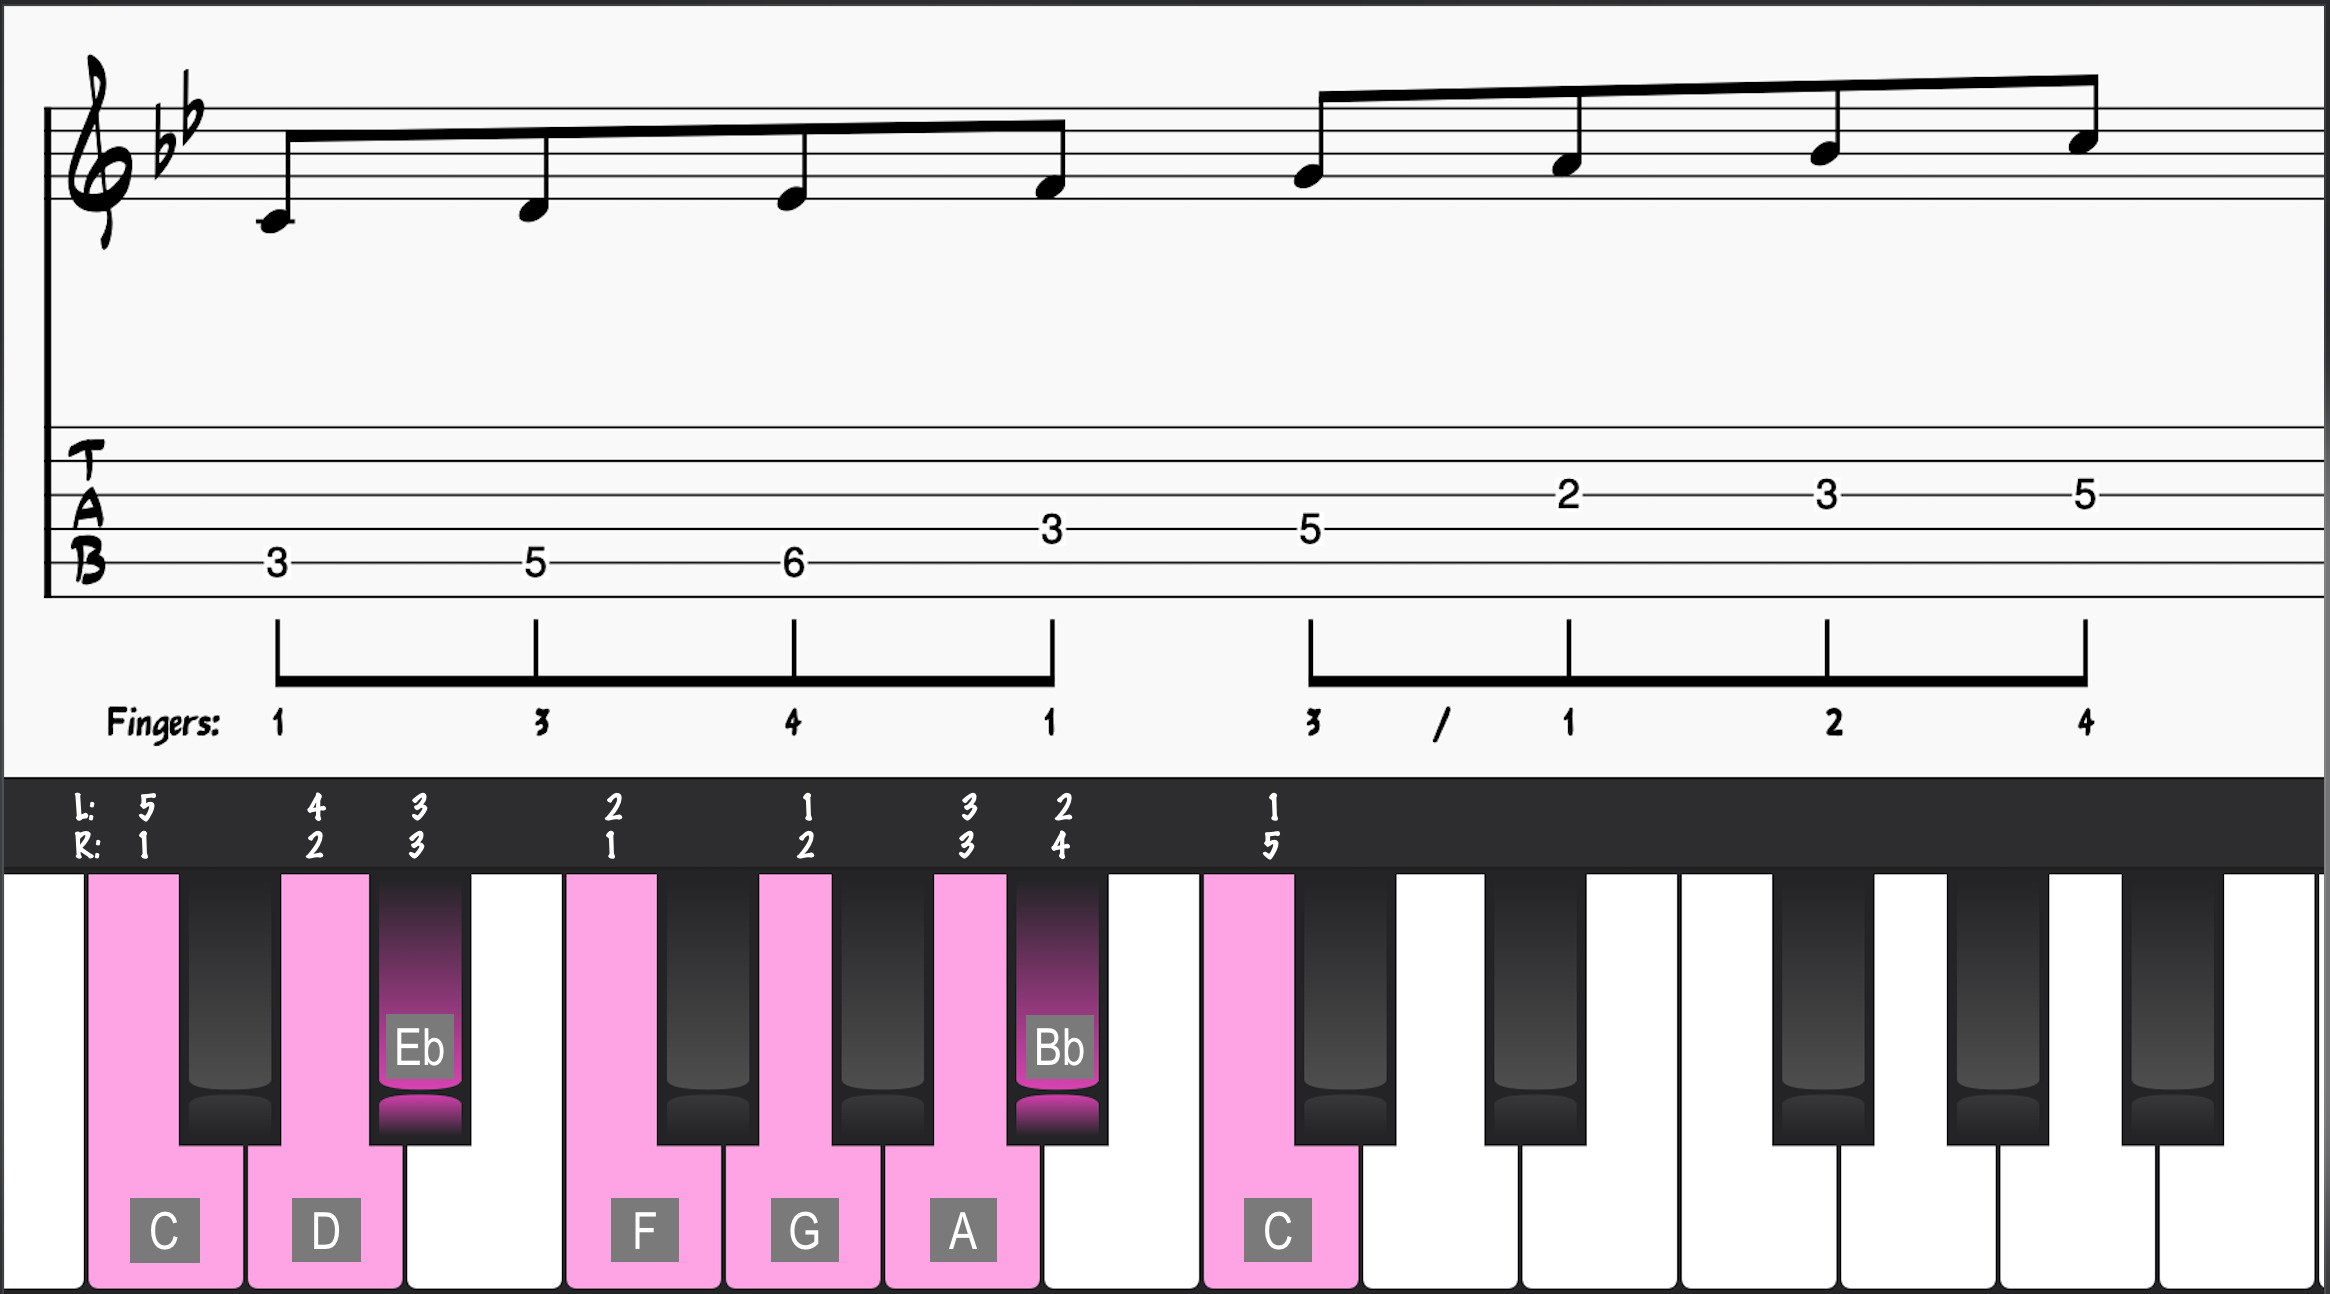 C Dorian Mode with Piano and Guitar Fingerings